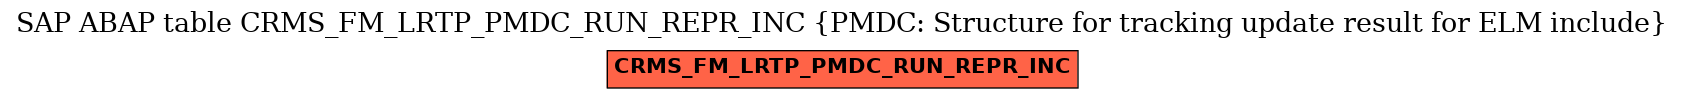 E-R Diagram for table CRMS_FM_LRTP_PMDC_RUN_REPR_INC (PMDC: Structure for tracking update result for ELM include)